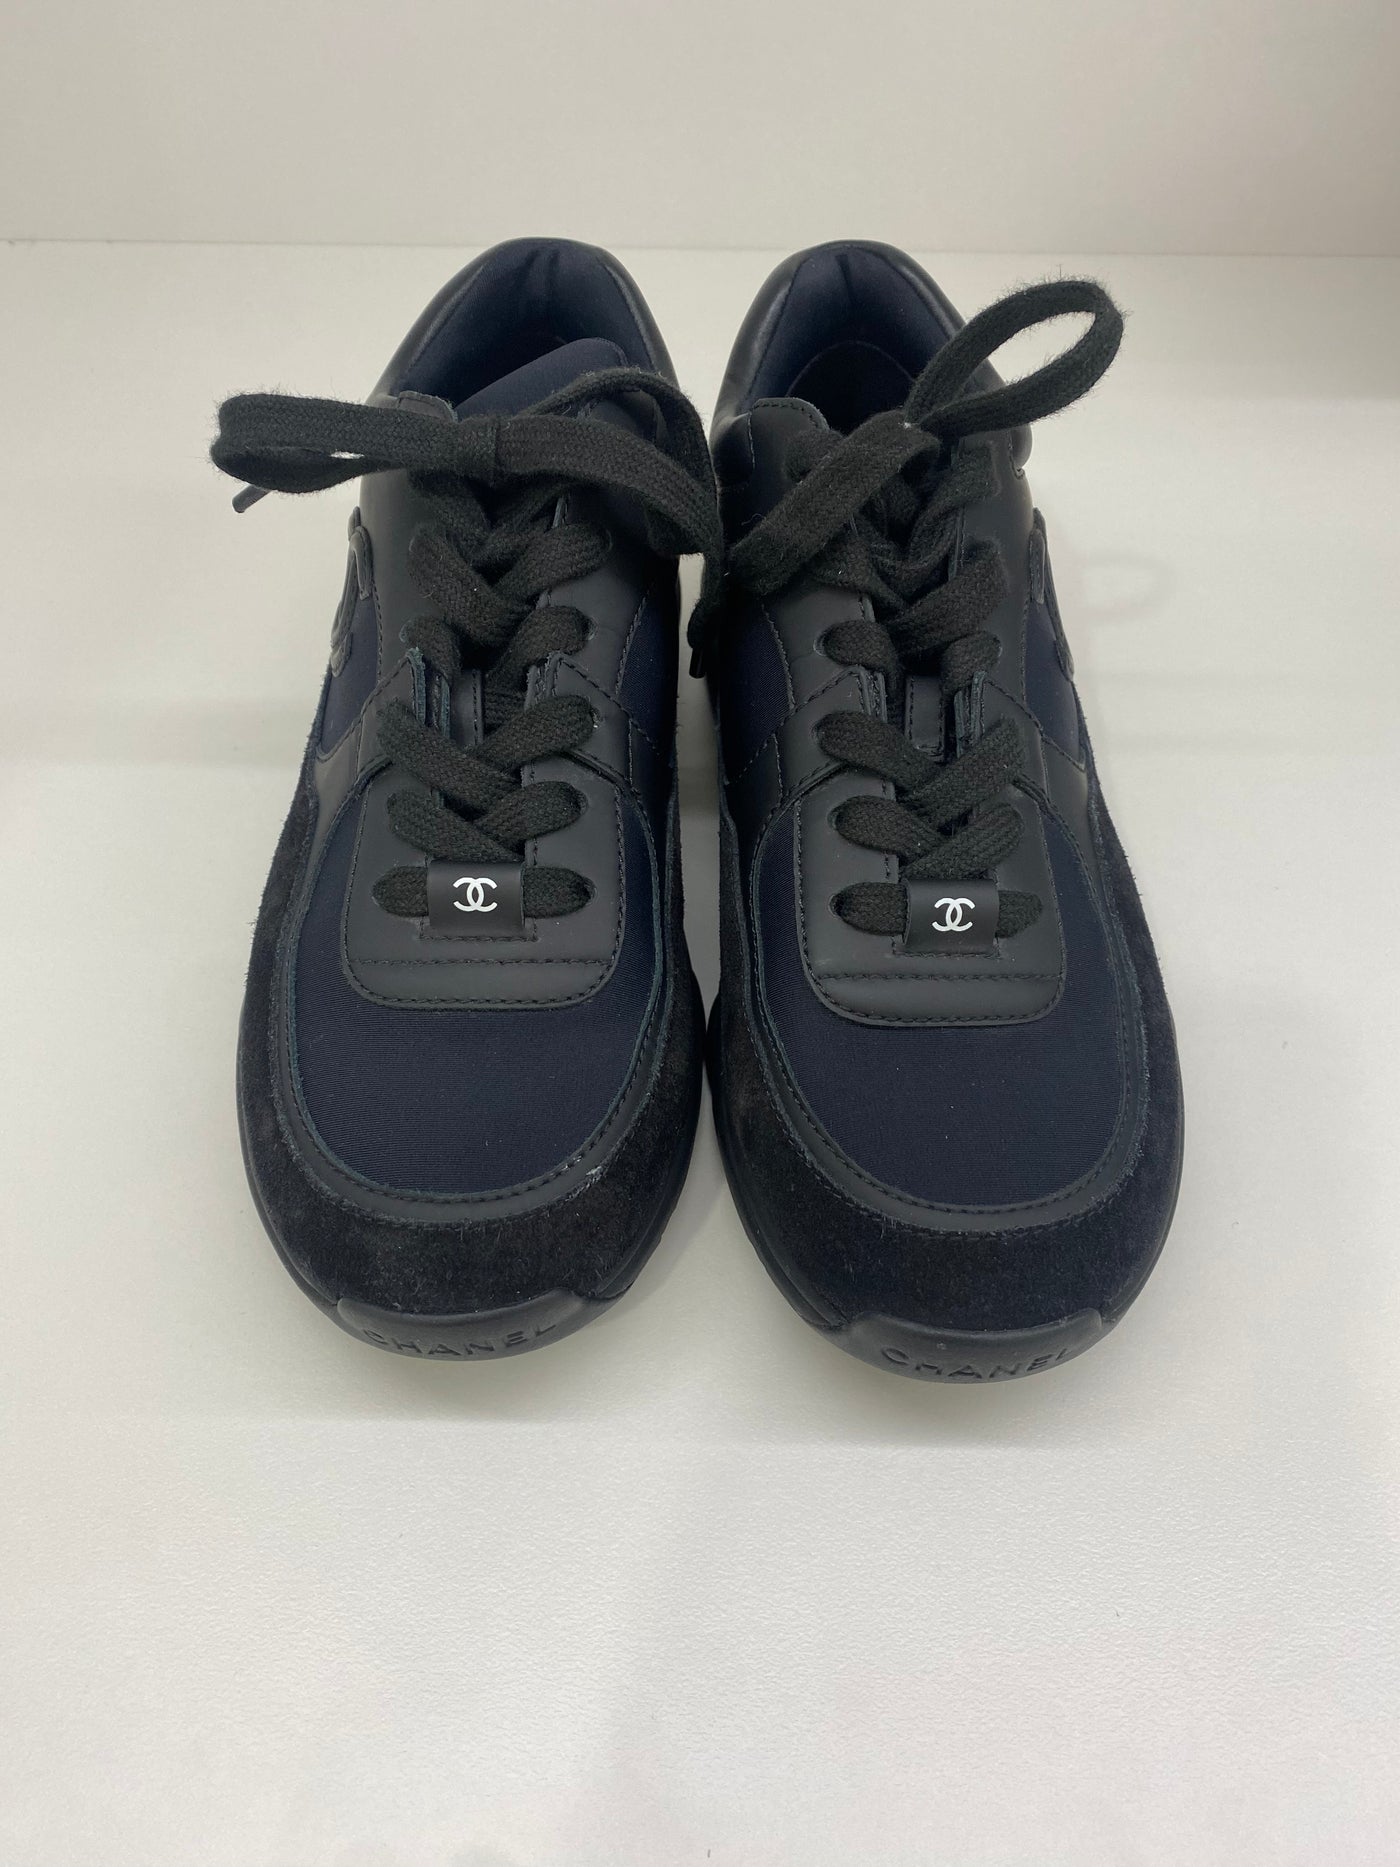 Chanel All Black Sneakers Size 36